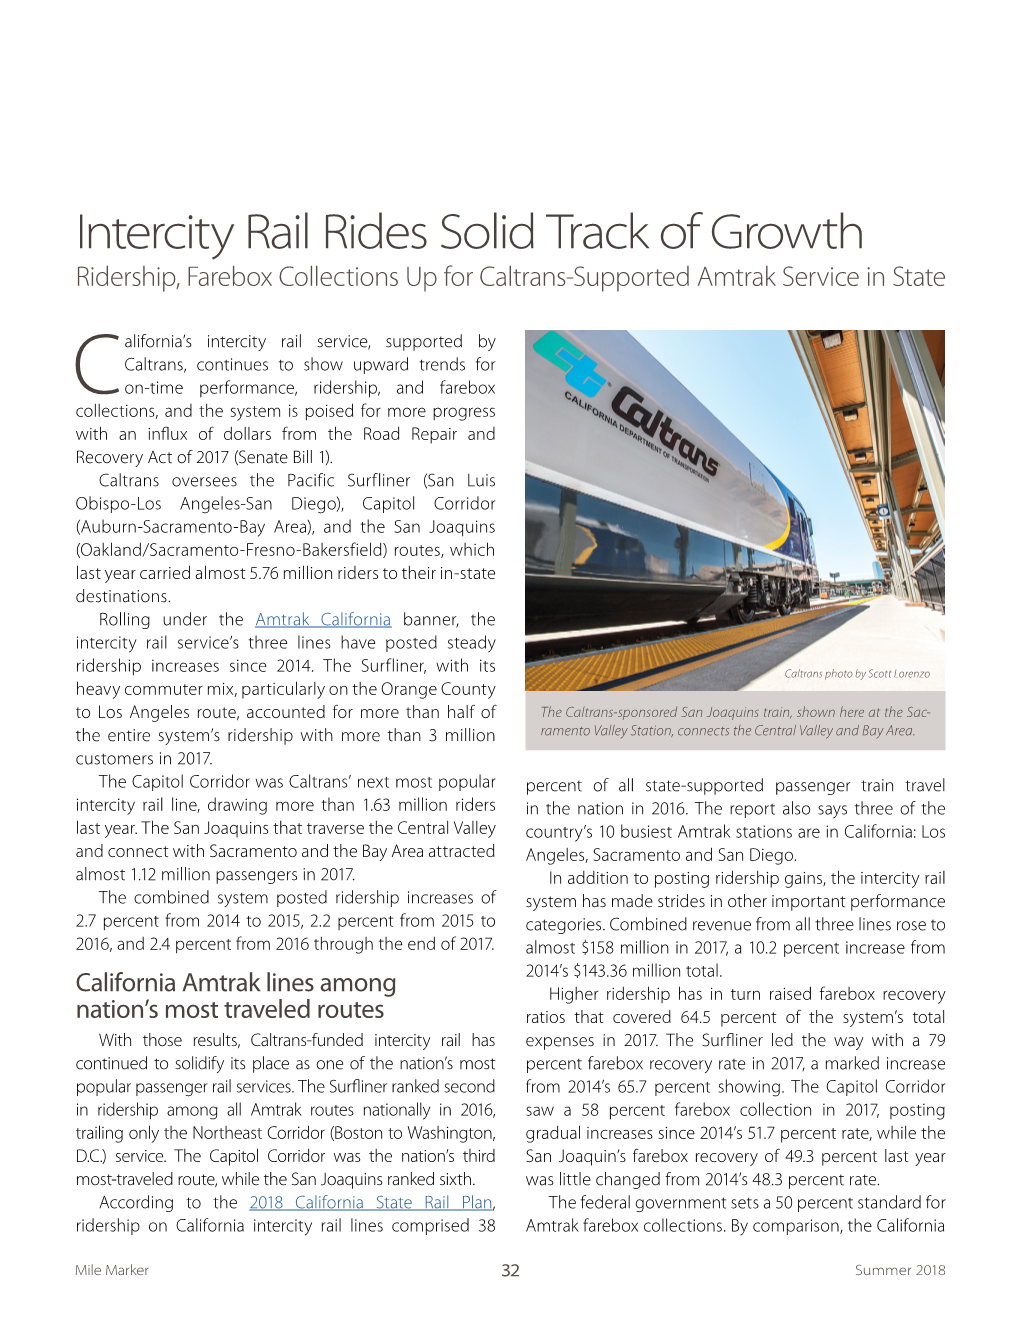 Intercity Rail Rides Solid Track of Growth Ridership, Farebox Collections up for Caltrans-Supported Amtrak Service in State